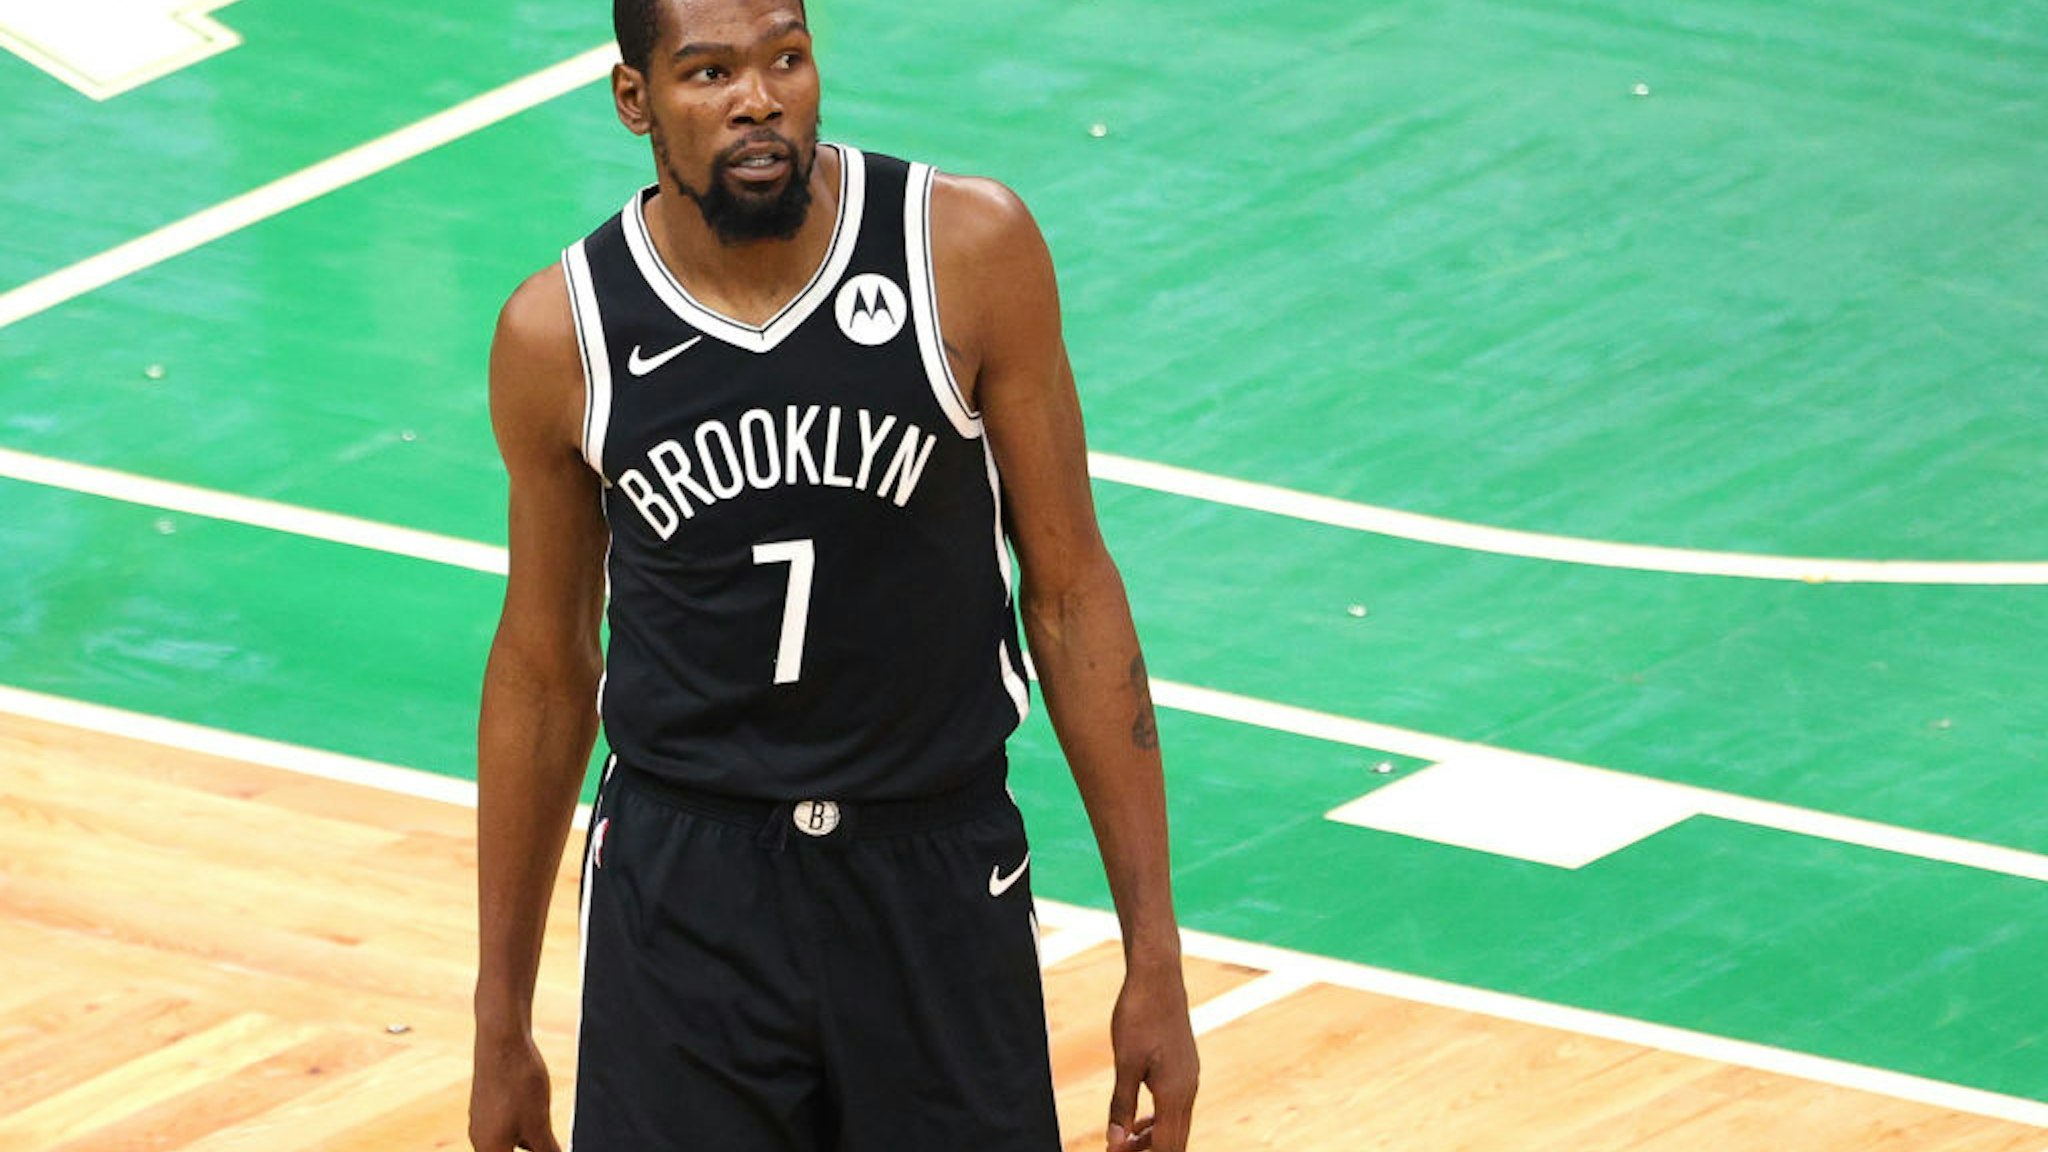 BOSTON, MASSACHUSETTS - DECEMBER 18: Kevin Durant #7 of the Brooklyn Nets looks on during the preseason game between the Nets and the Boston Celtics at TD Garden on December 18, 2020 in Boston, Massachusetts. NOTE TO USER: User expressly acknowledges and agrees that, by downloading and or using this photograph, User is consenting to the terms and conditions of the Getty Images License Agreement. (Photo by Maddie Meyer/Getty Images)